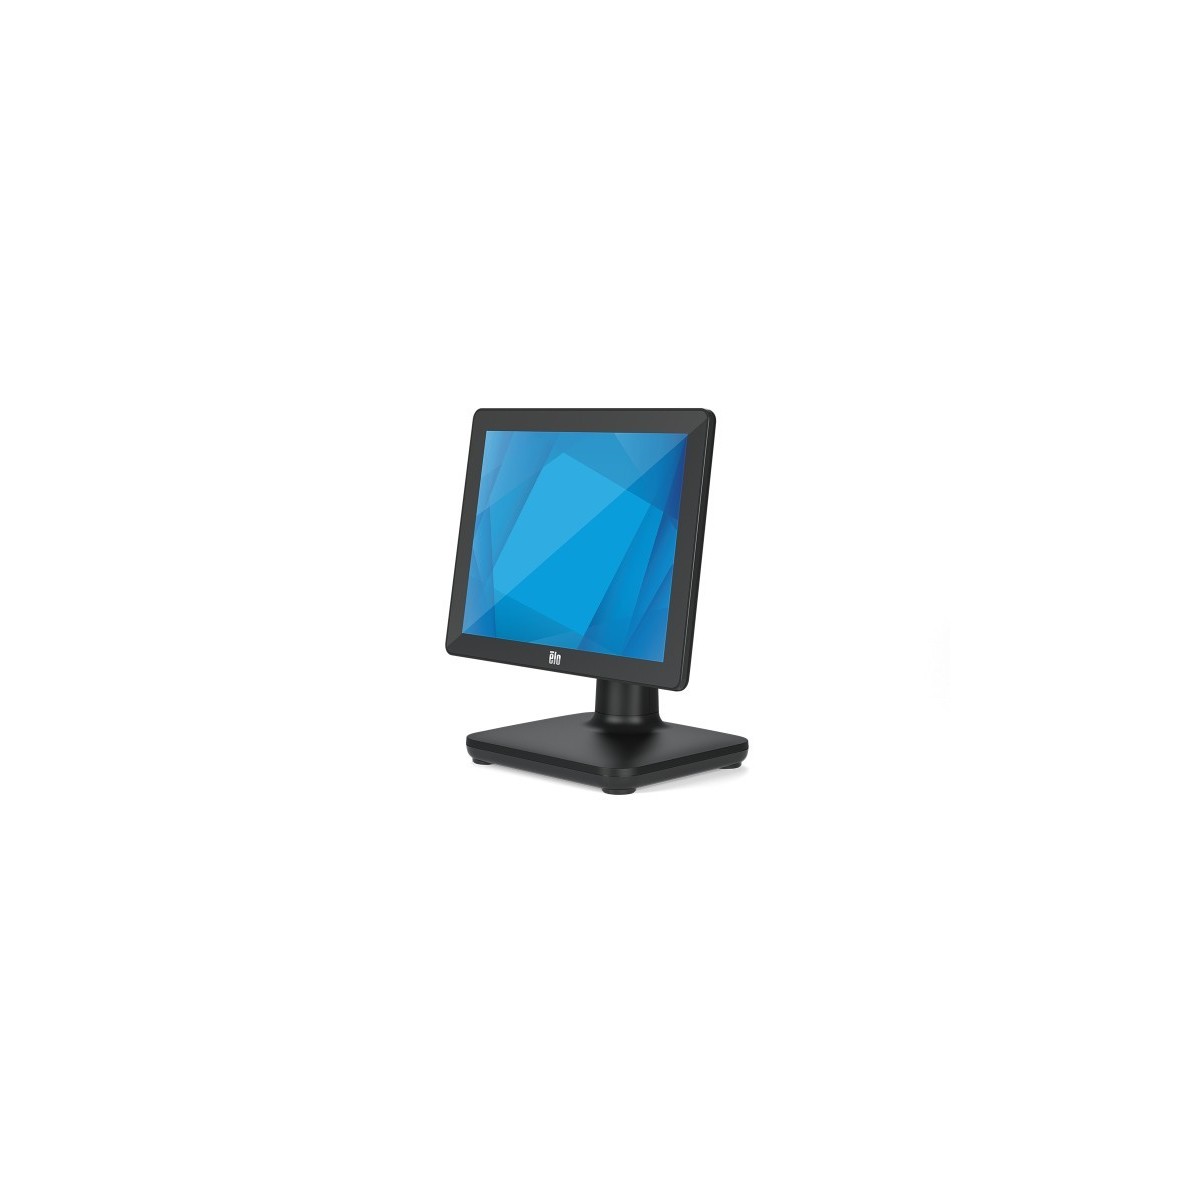 Elo Touch Solutions Elo Touch Solution E931330 - 38.1 cm (15") - 1024 x 768 pixels - LCD - 340 cd/m² - Projected capacitive syst